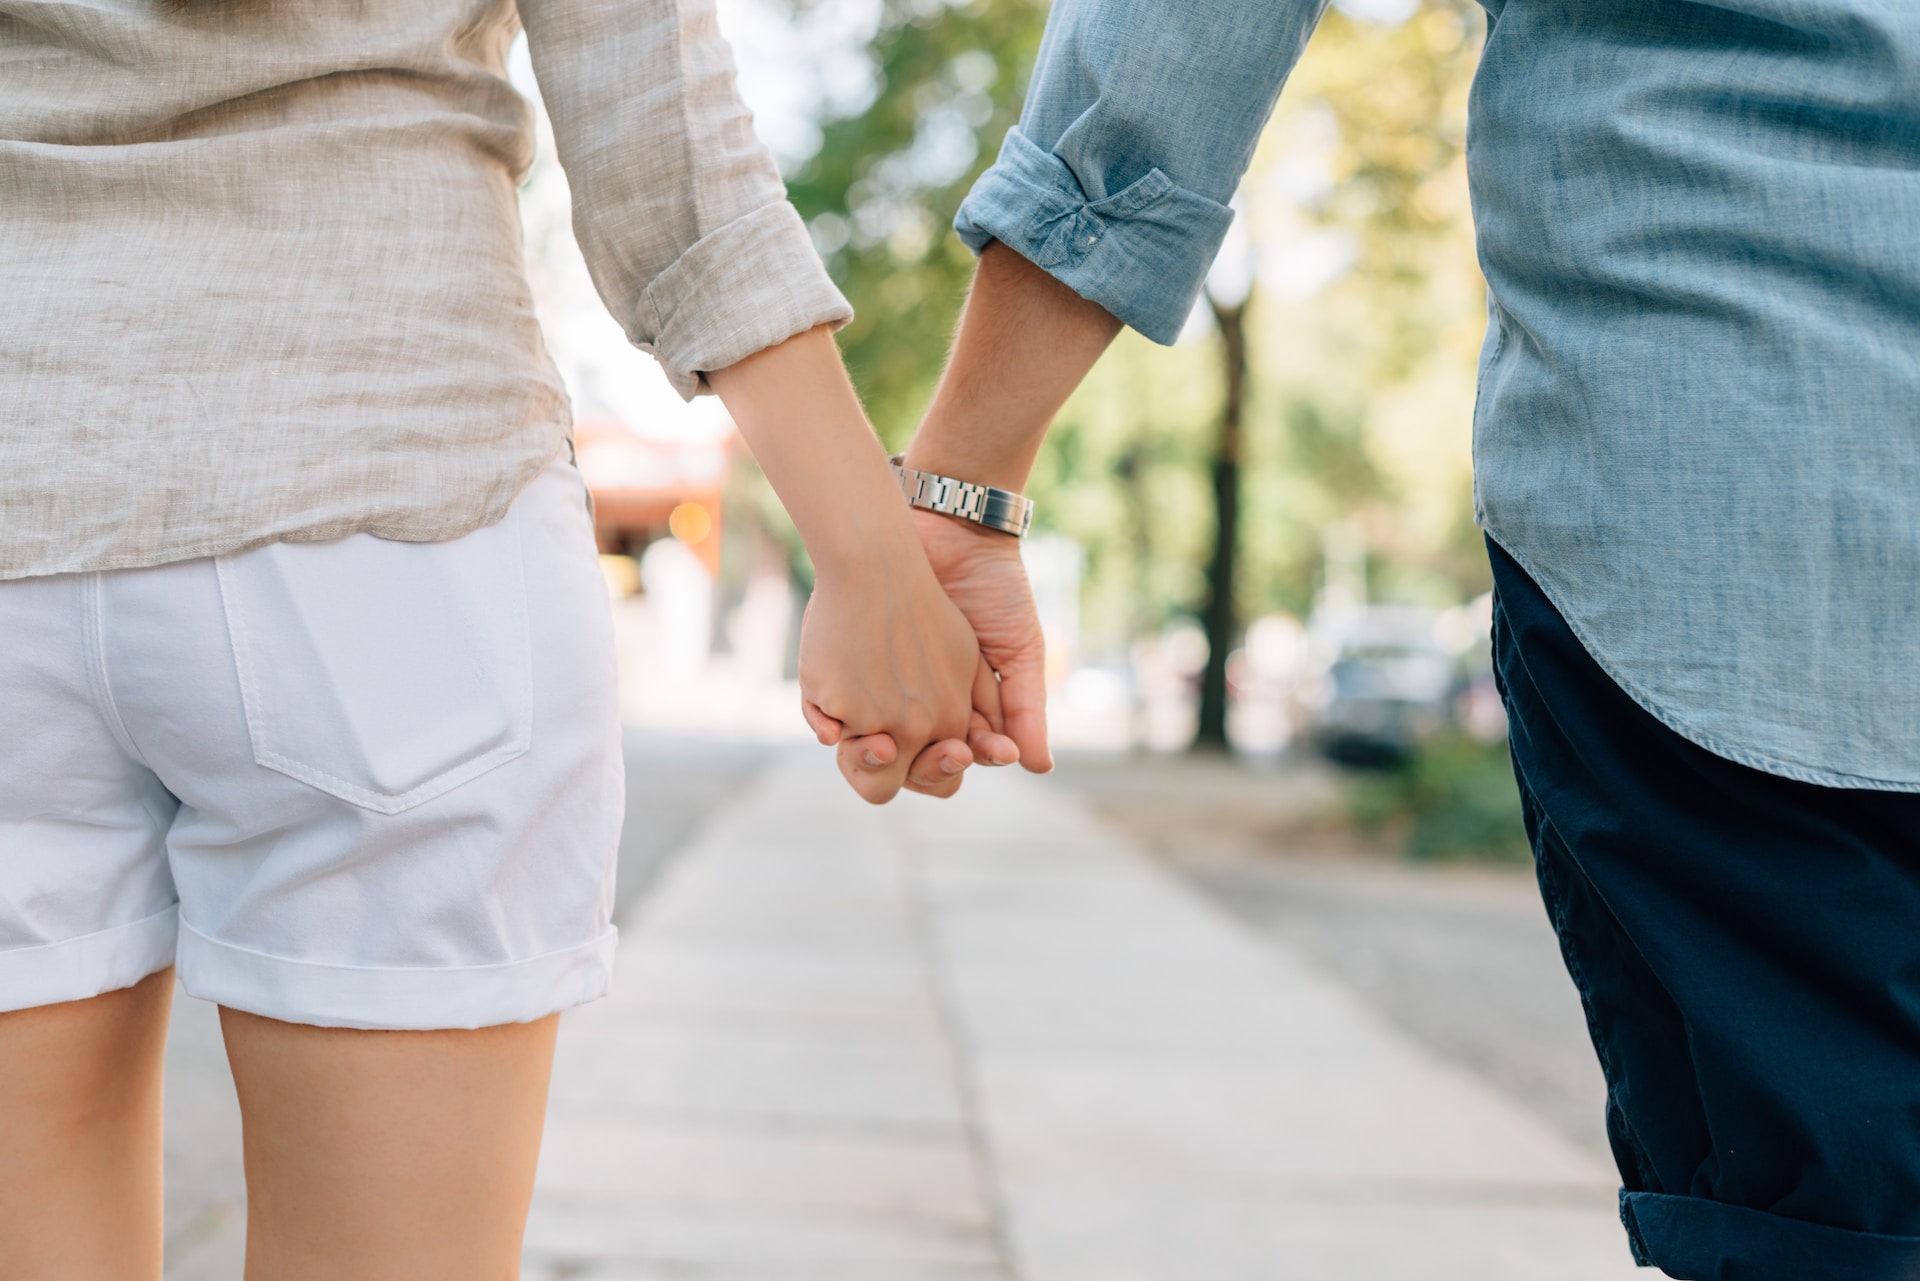 Man and woman holding hands while walking down the street.